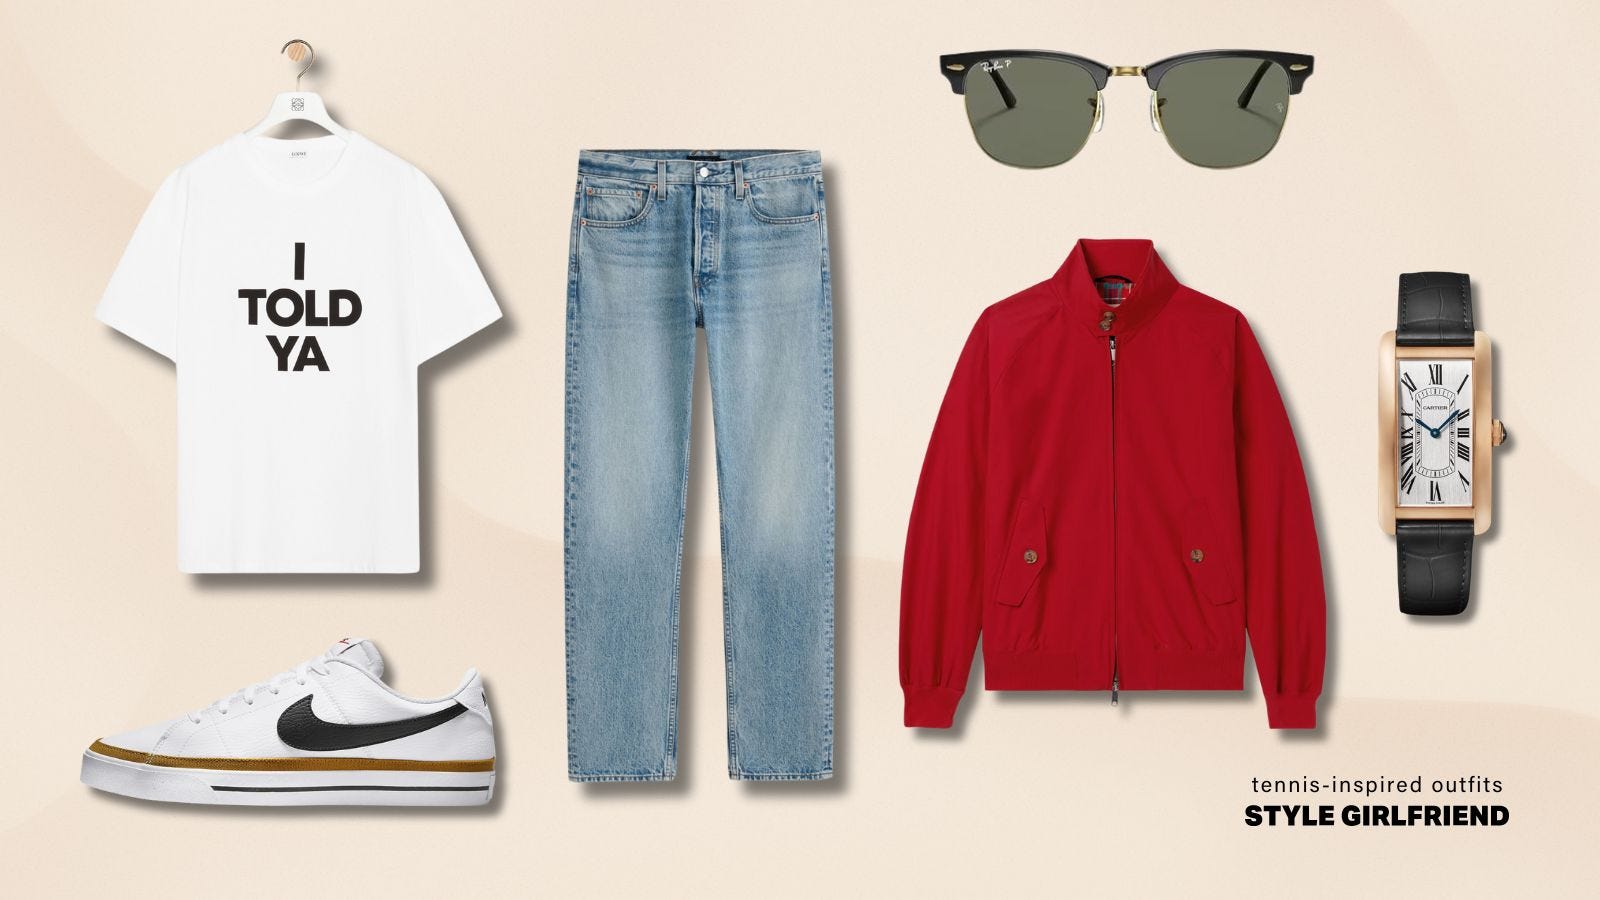 Flat lay image of casual men's clothing, paired with 